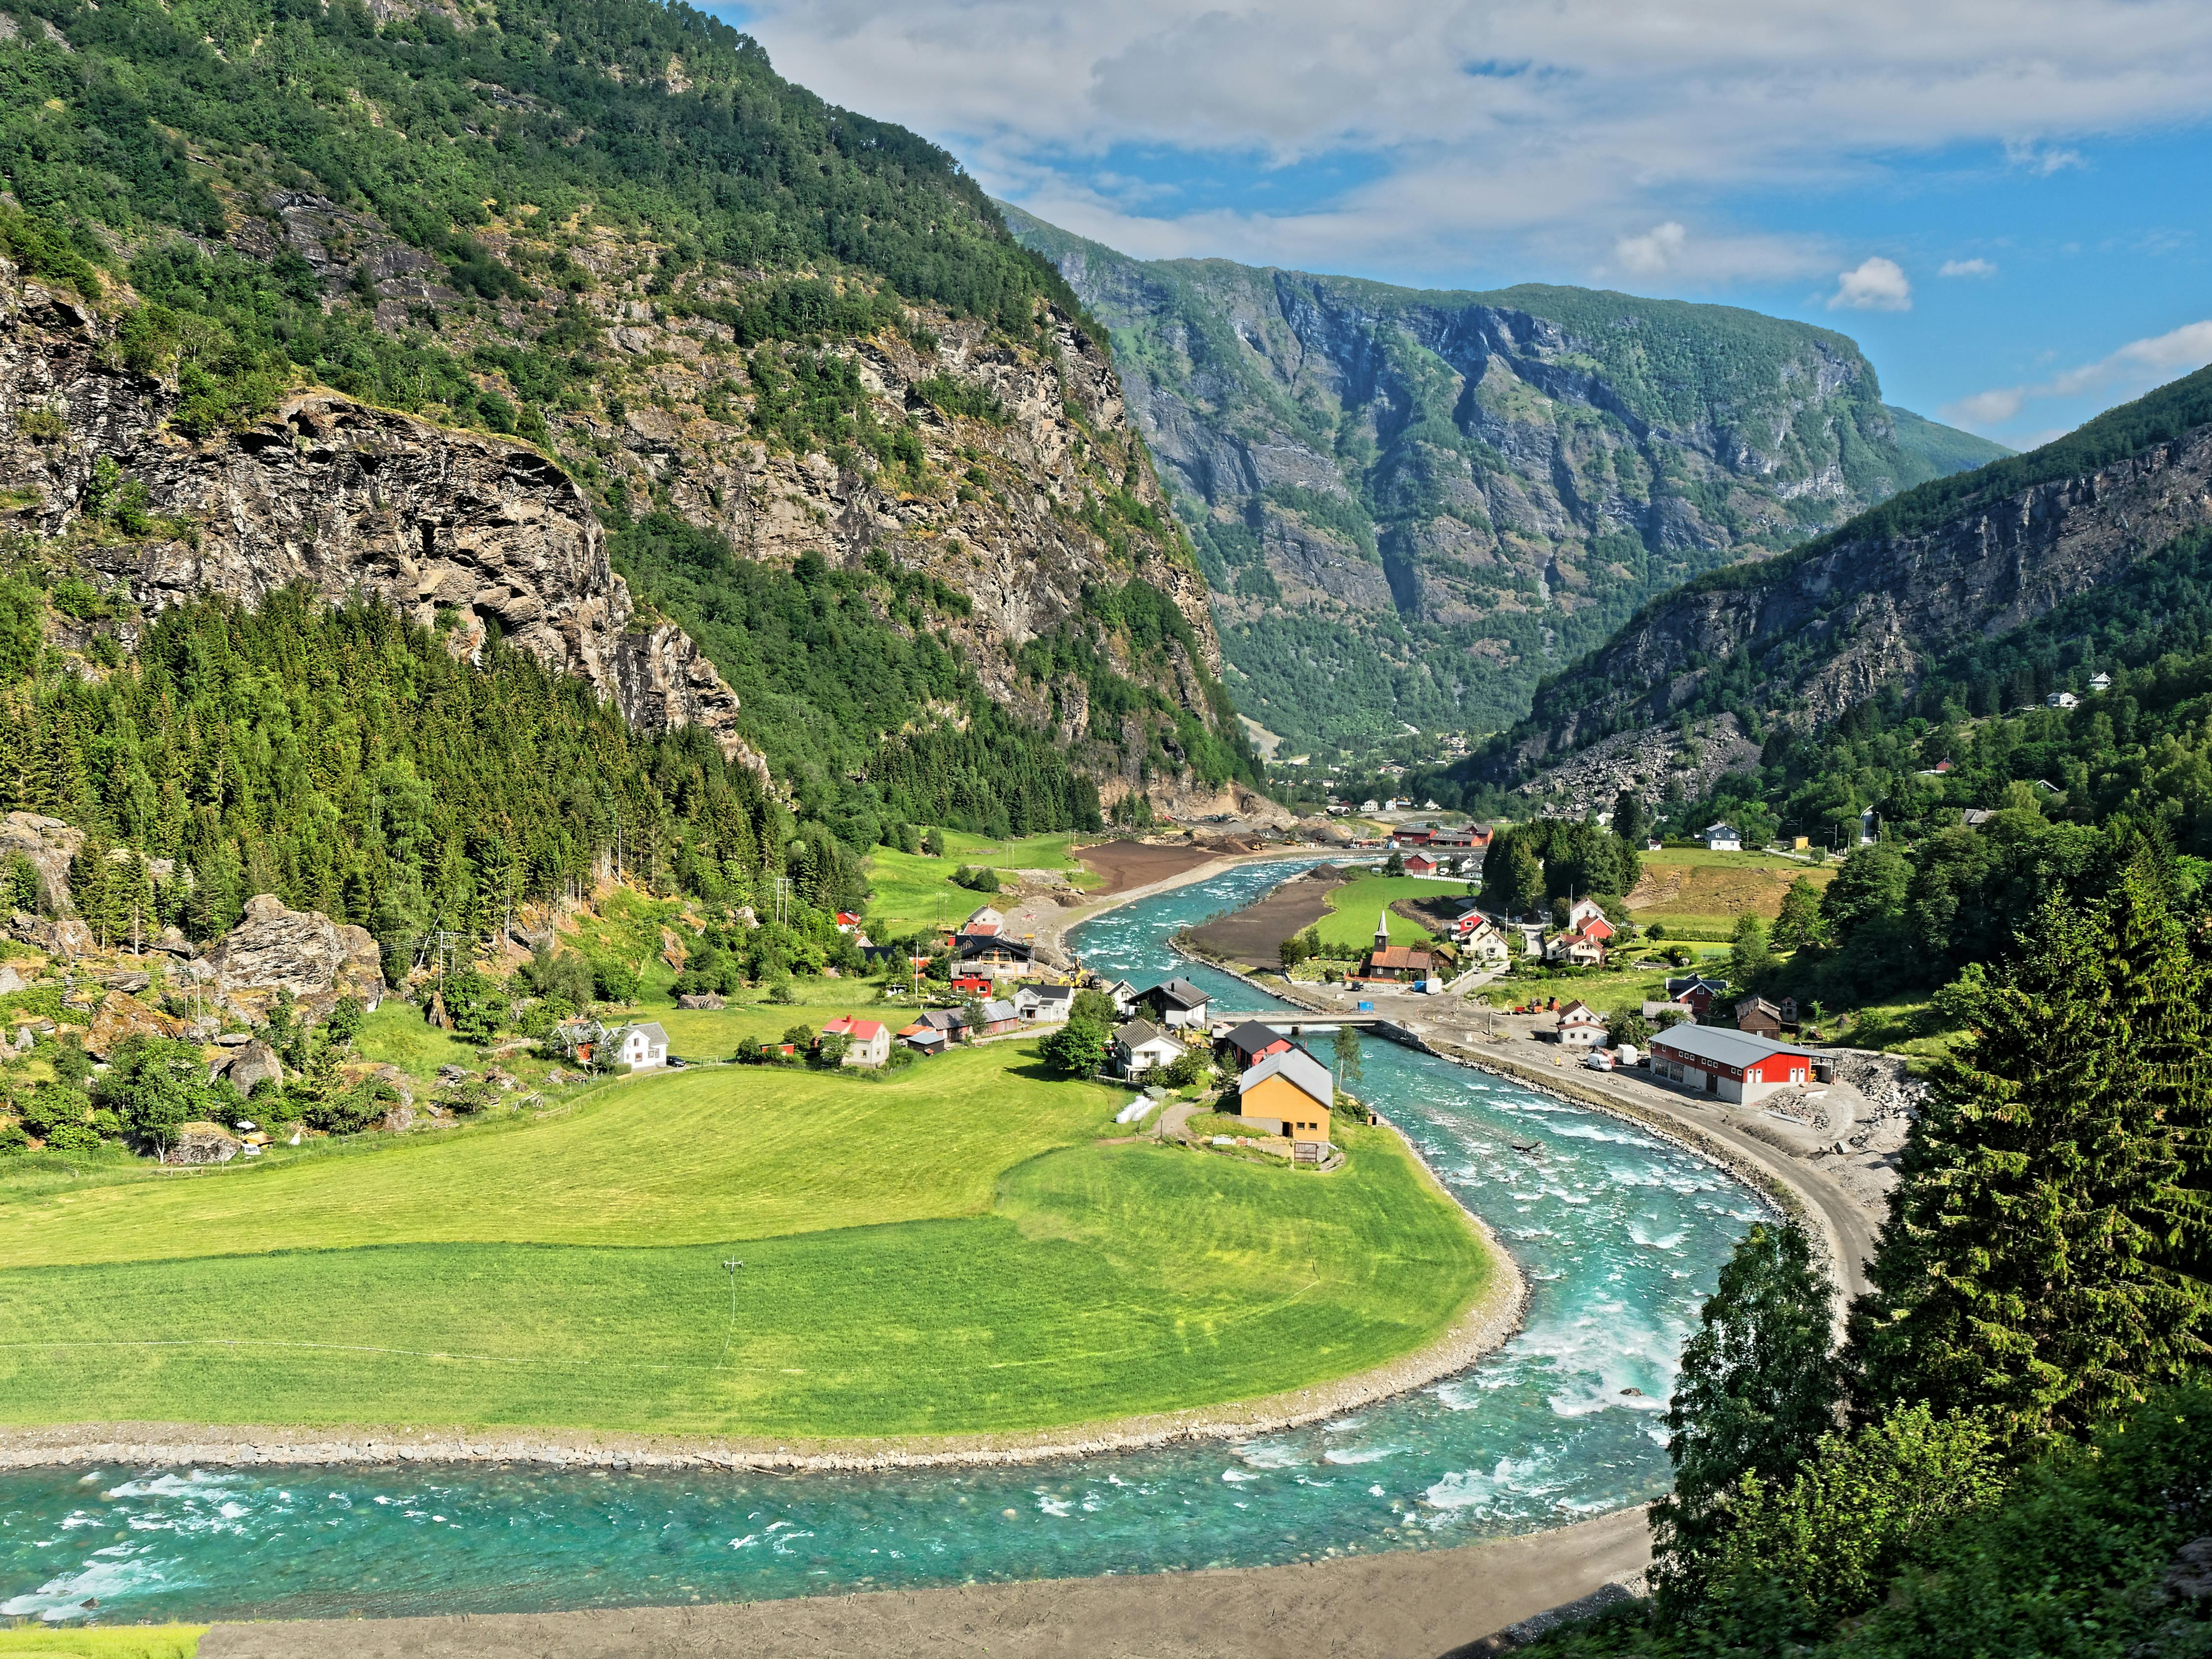 Self-guided round trip from Oslo to Sognefjord with the Flåm railway